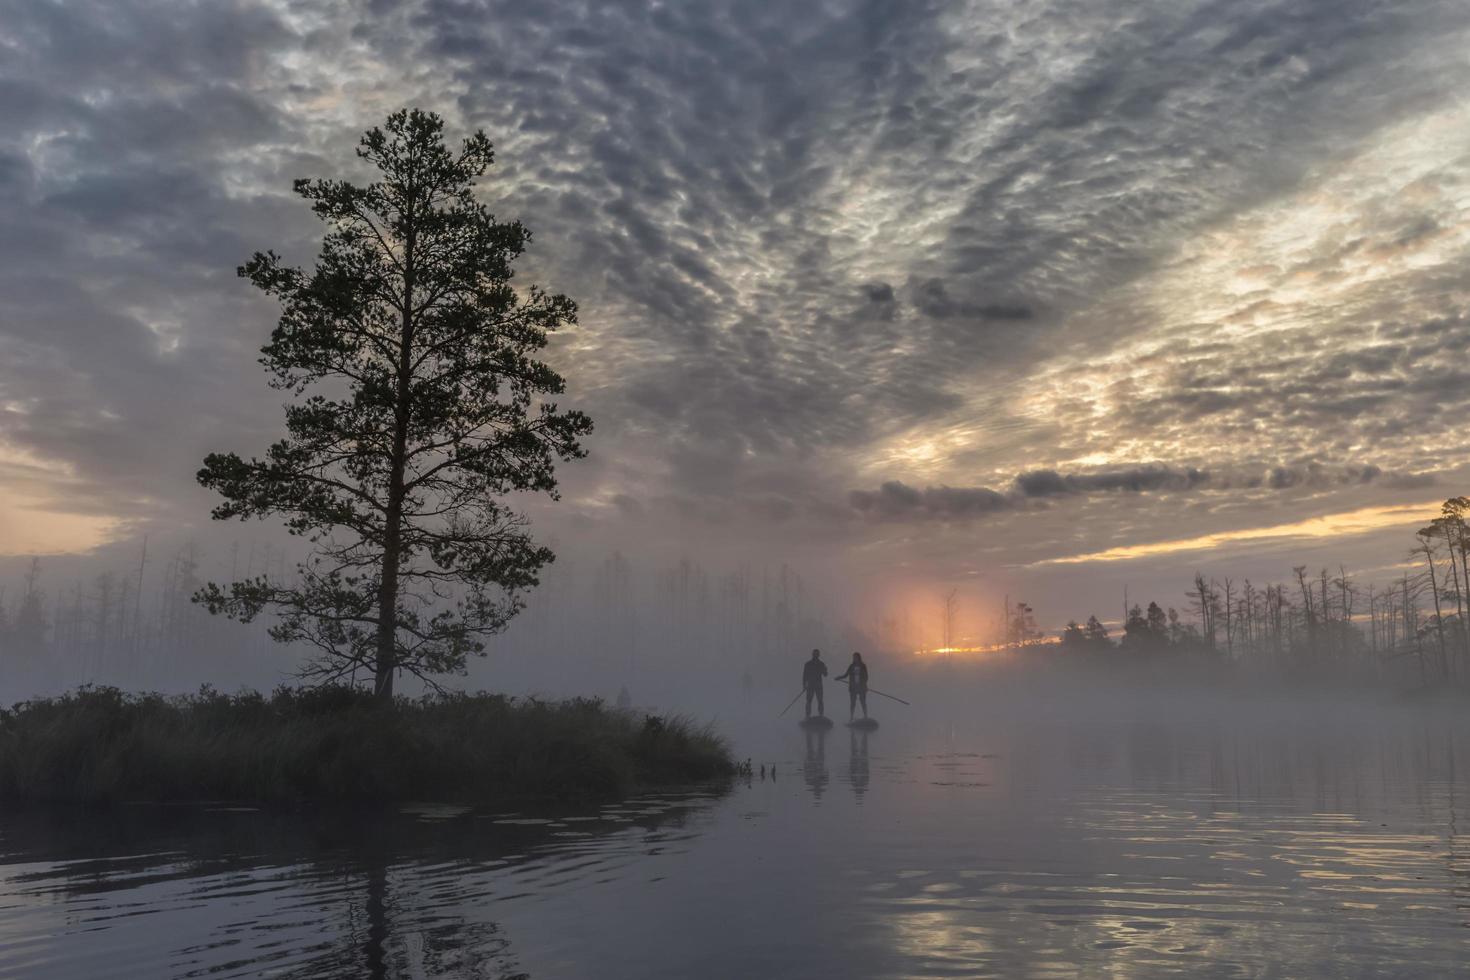 Sunrise at foggy swamp with small dead trees covered in early morning with people on sup boards photo